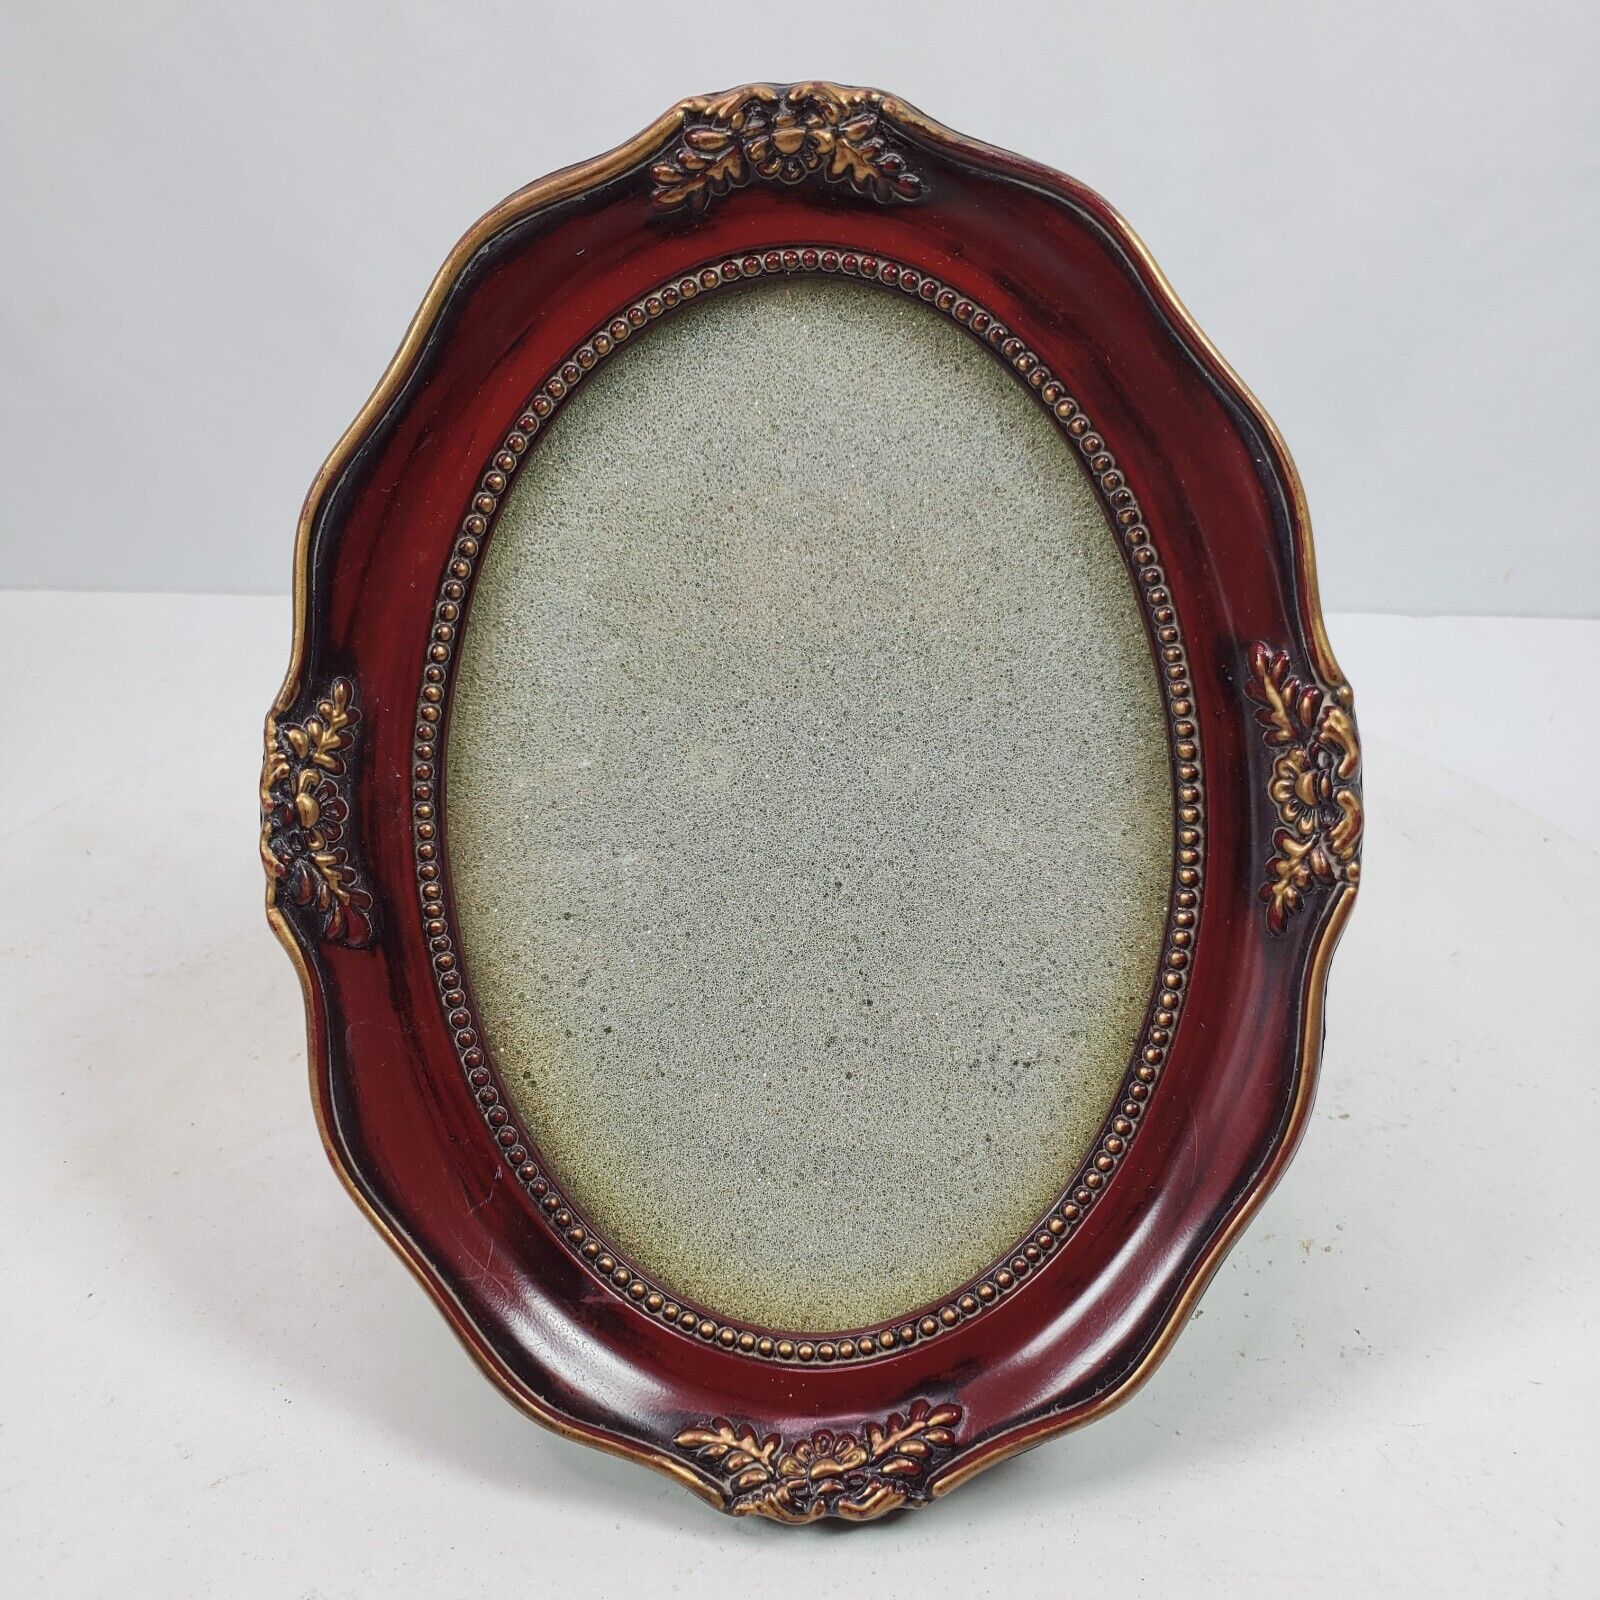 Vintage Victorian Style Oval Picture Frame Red Gold 7x5.5 Inch w/ Kick Stand